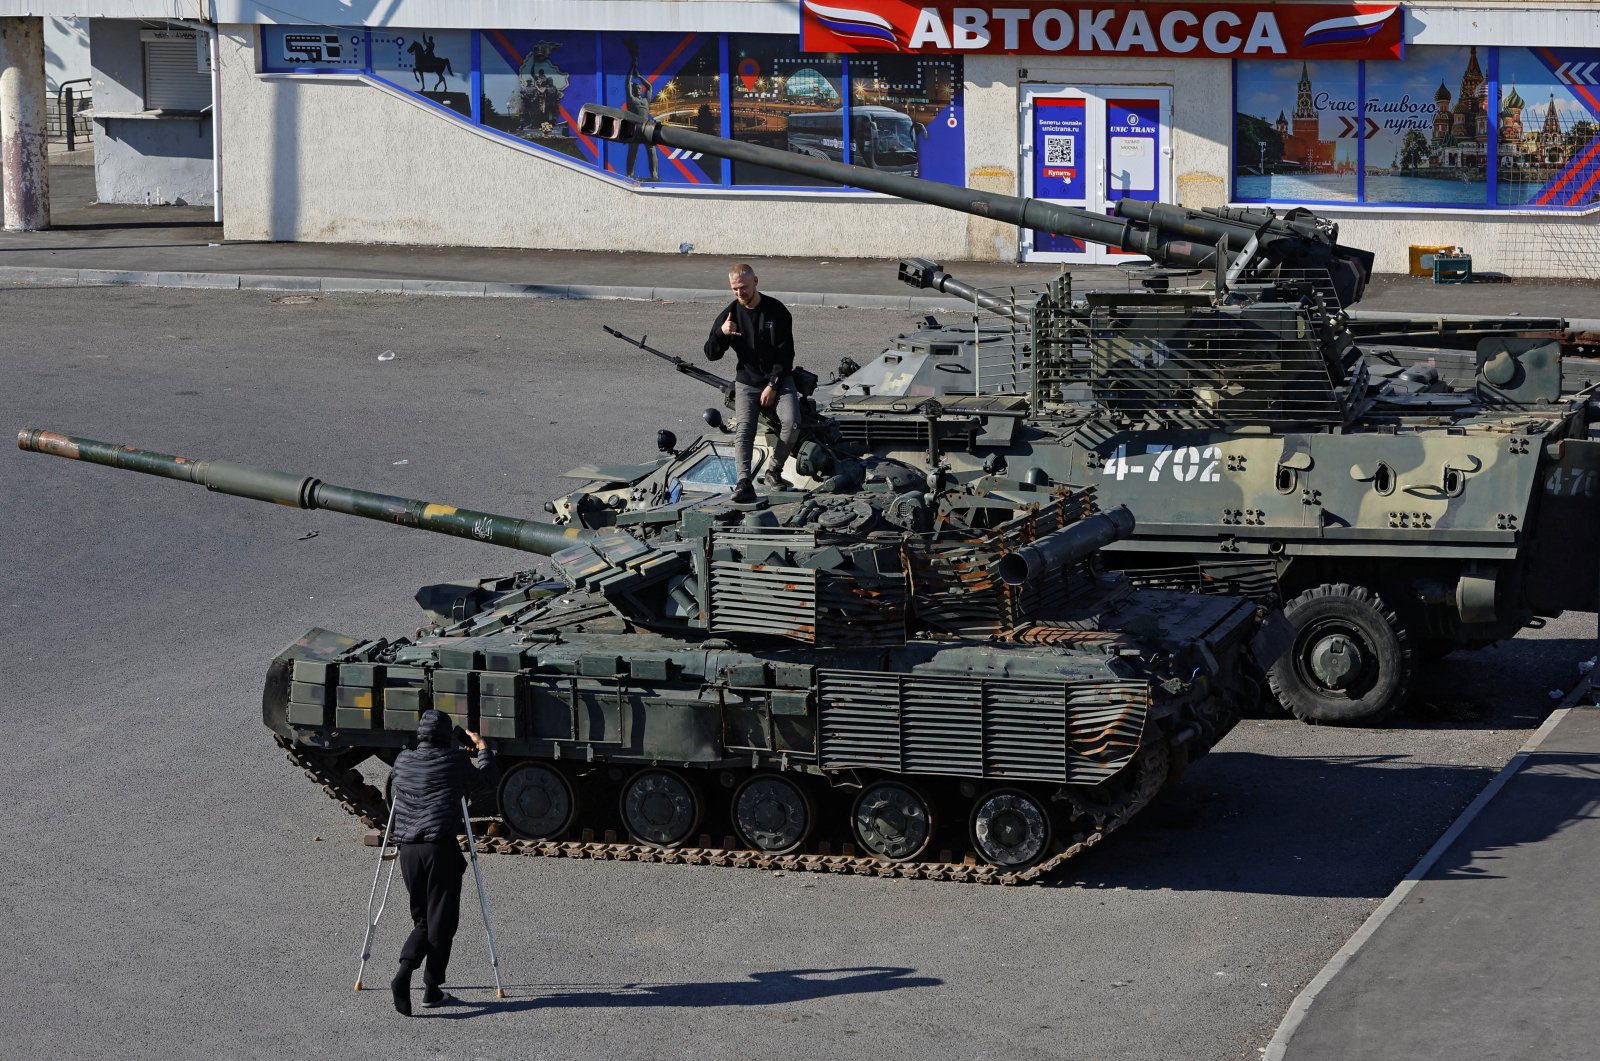 A man poses atop a tank at an exhibition of Ukrainian military equipment captured in the course of the Russia-Ukraine conflict, at the station square in Luhansk, Ukraine, Oct. 15, 2023. (Reuters File Photo)